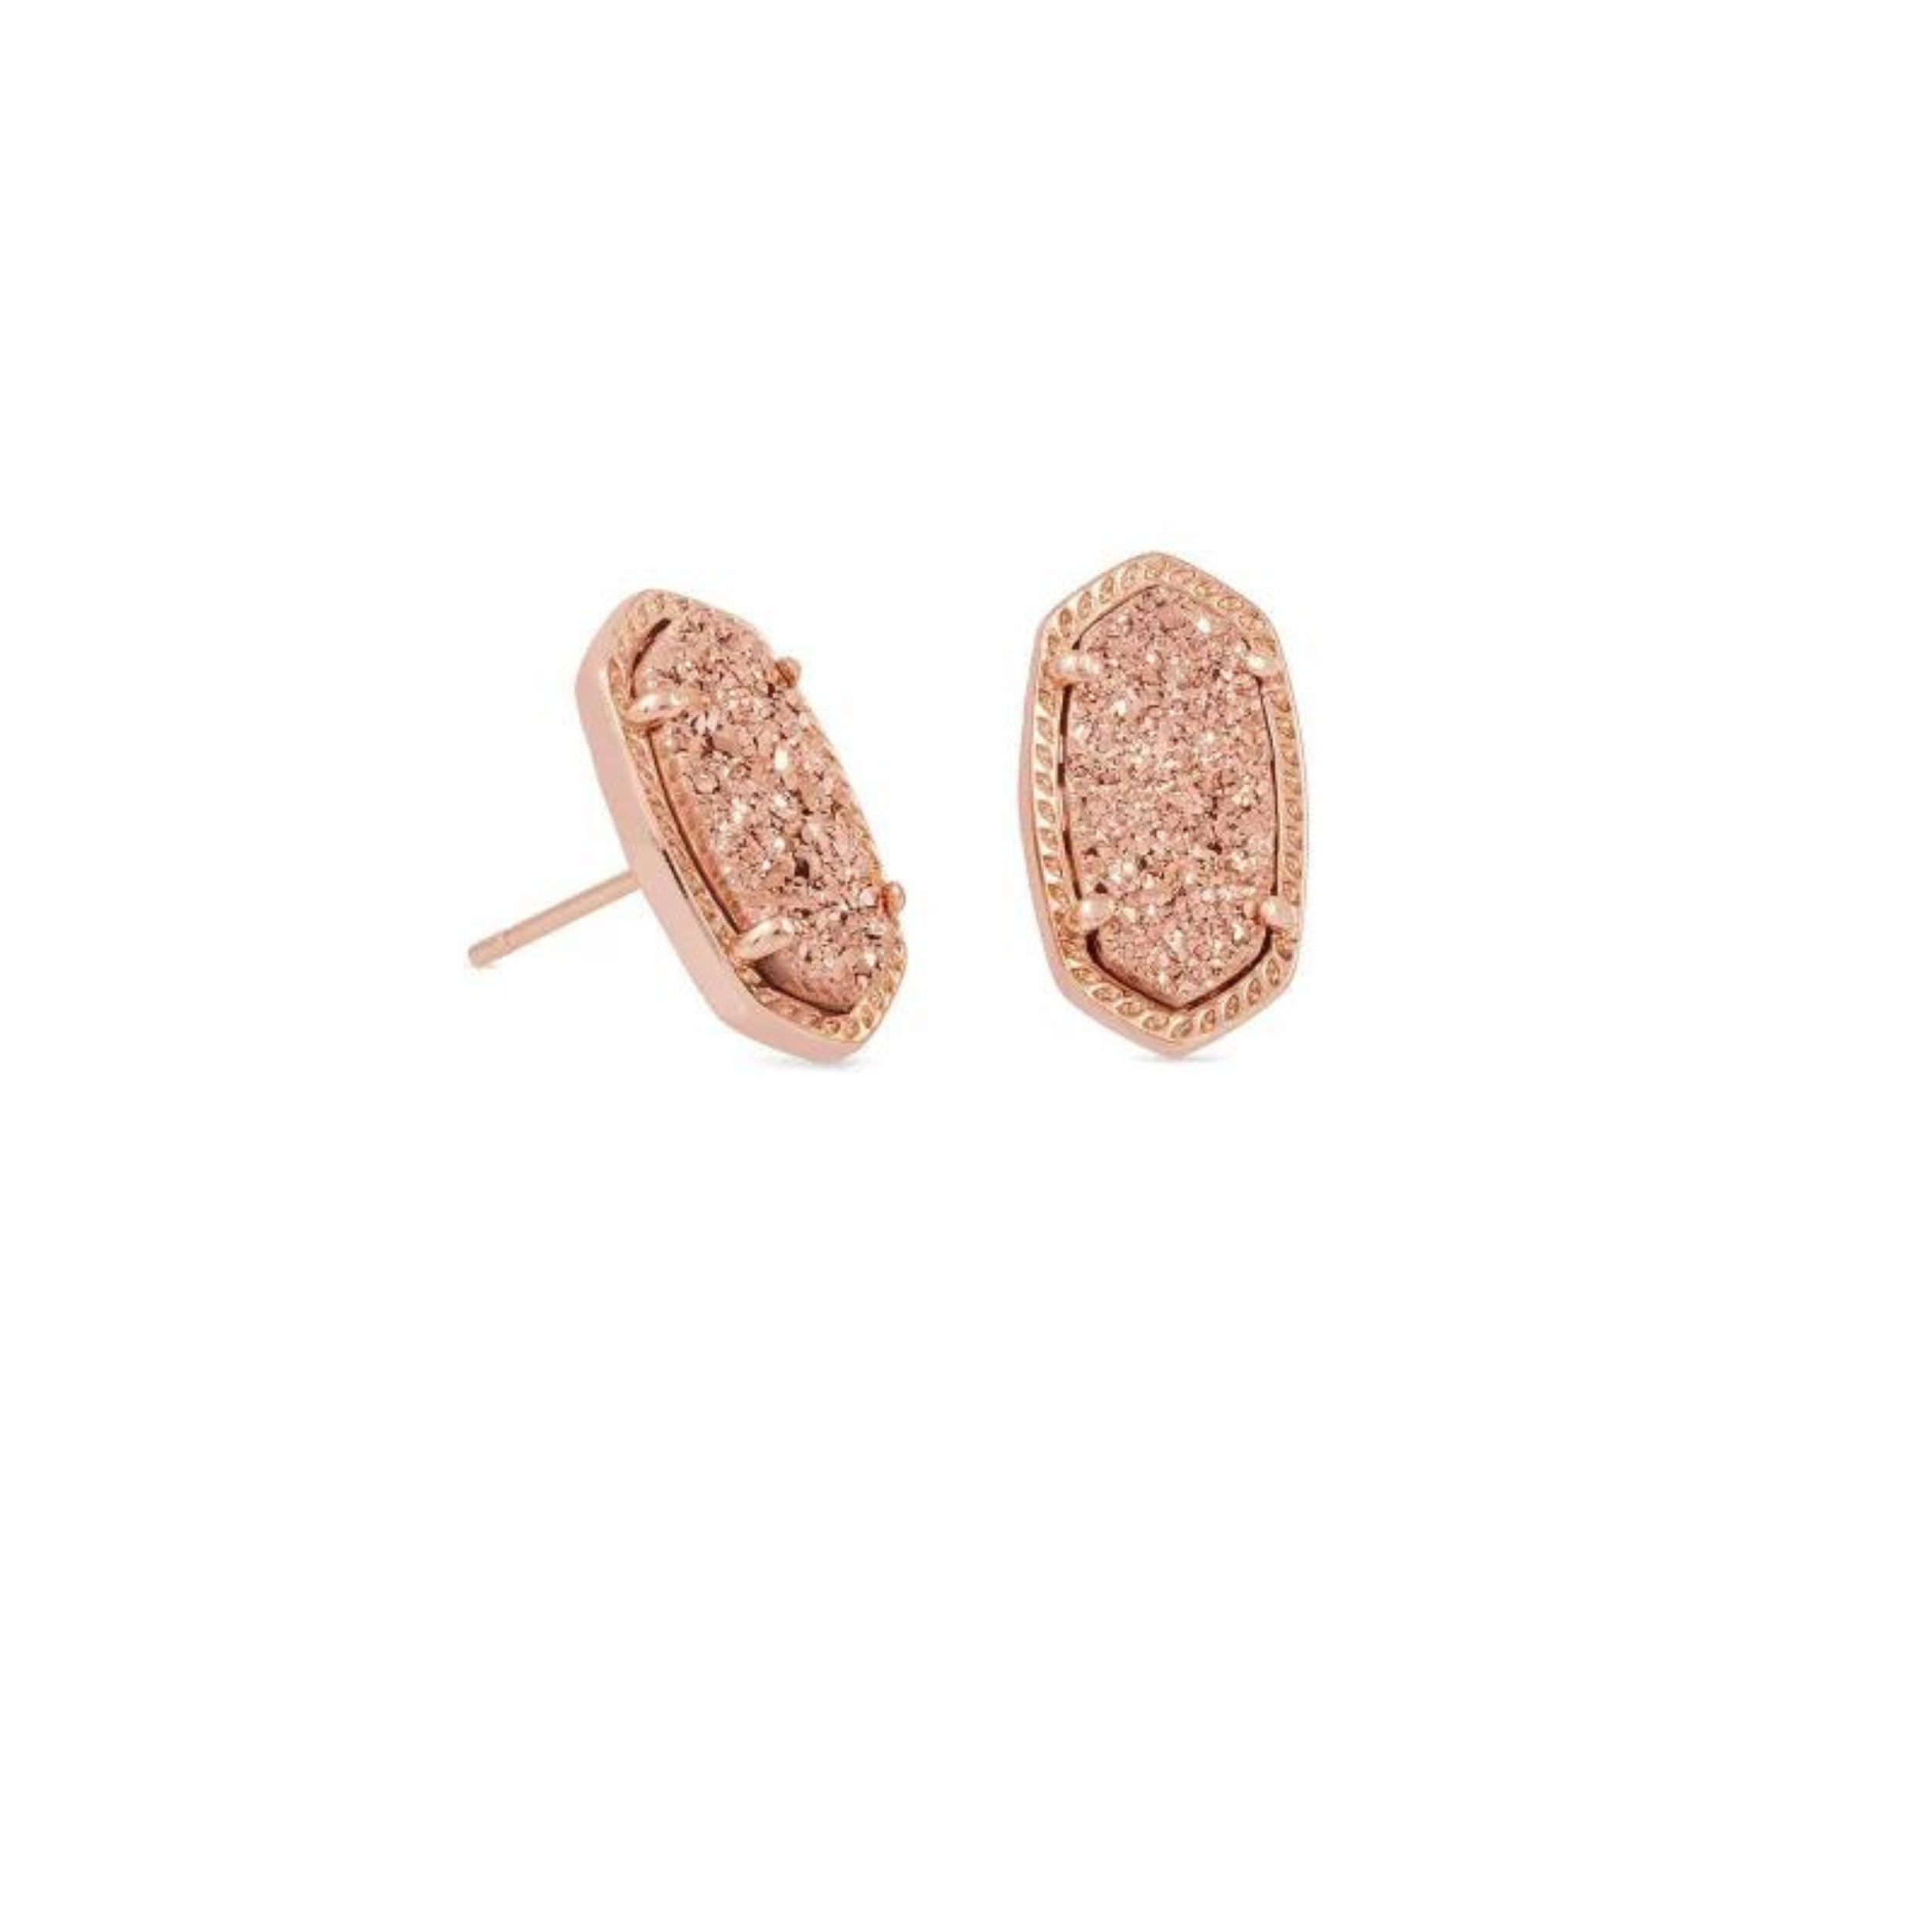 Rose gold stud earrings with rose gold drsuy stone, pictured on a white background.